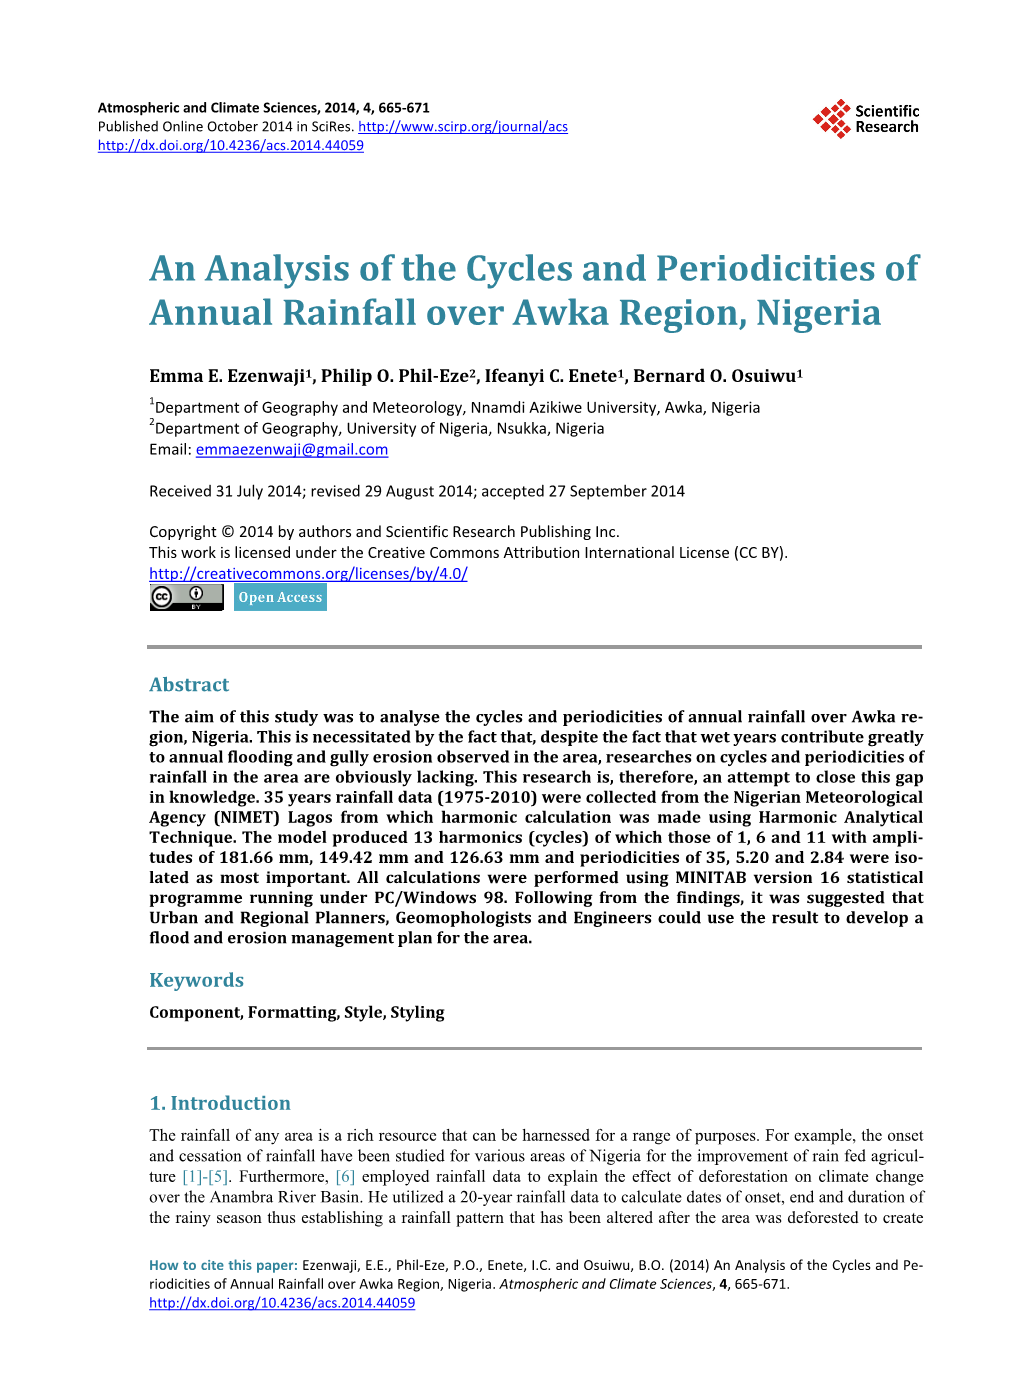 An Analysis of the Cycles and Periodicities of Annual Rainfall Over Awka Region, Nigeria